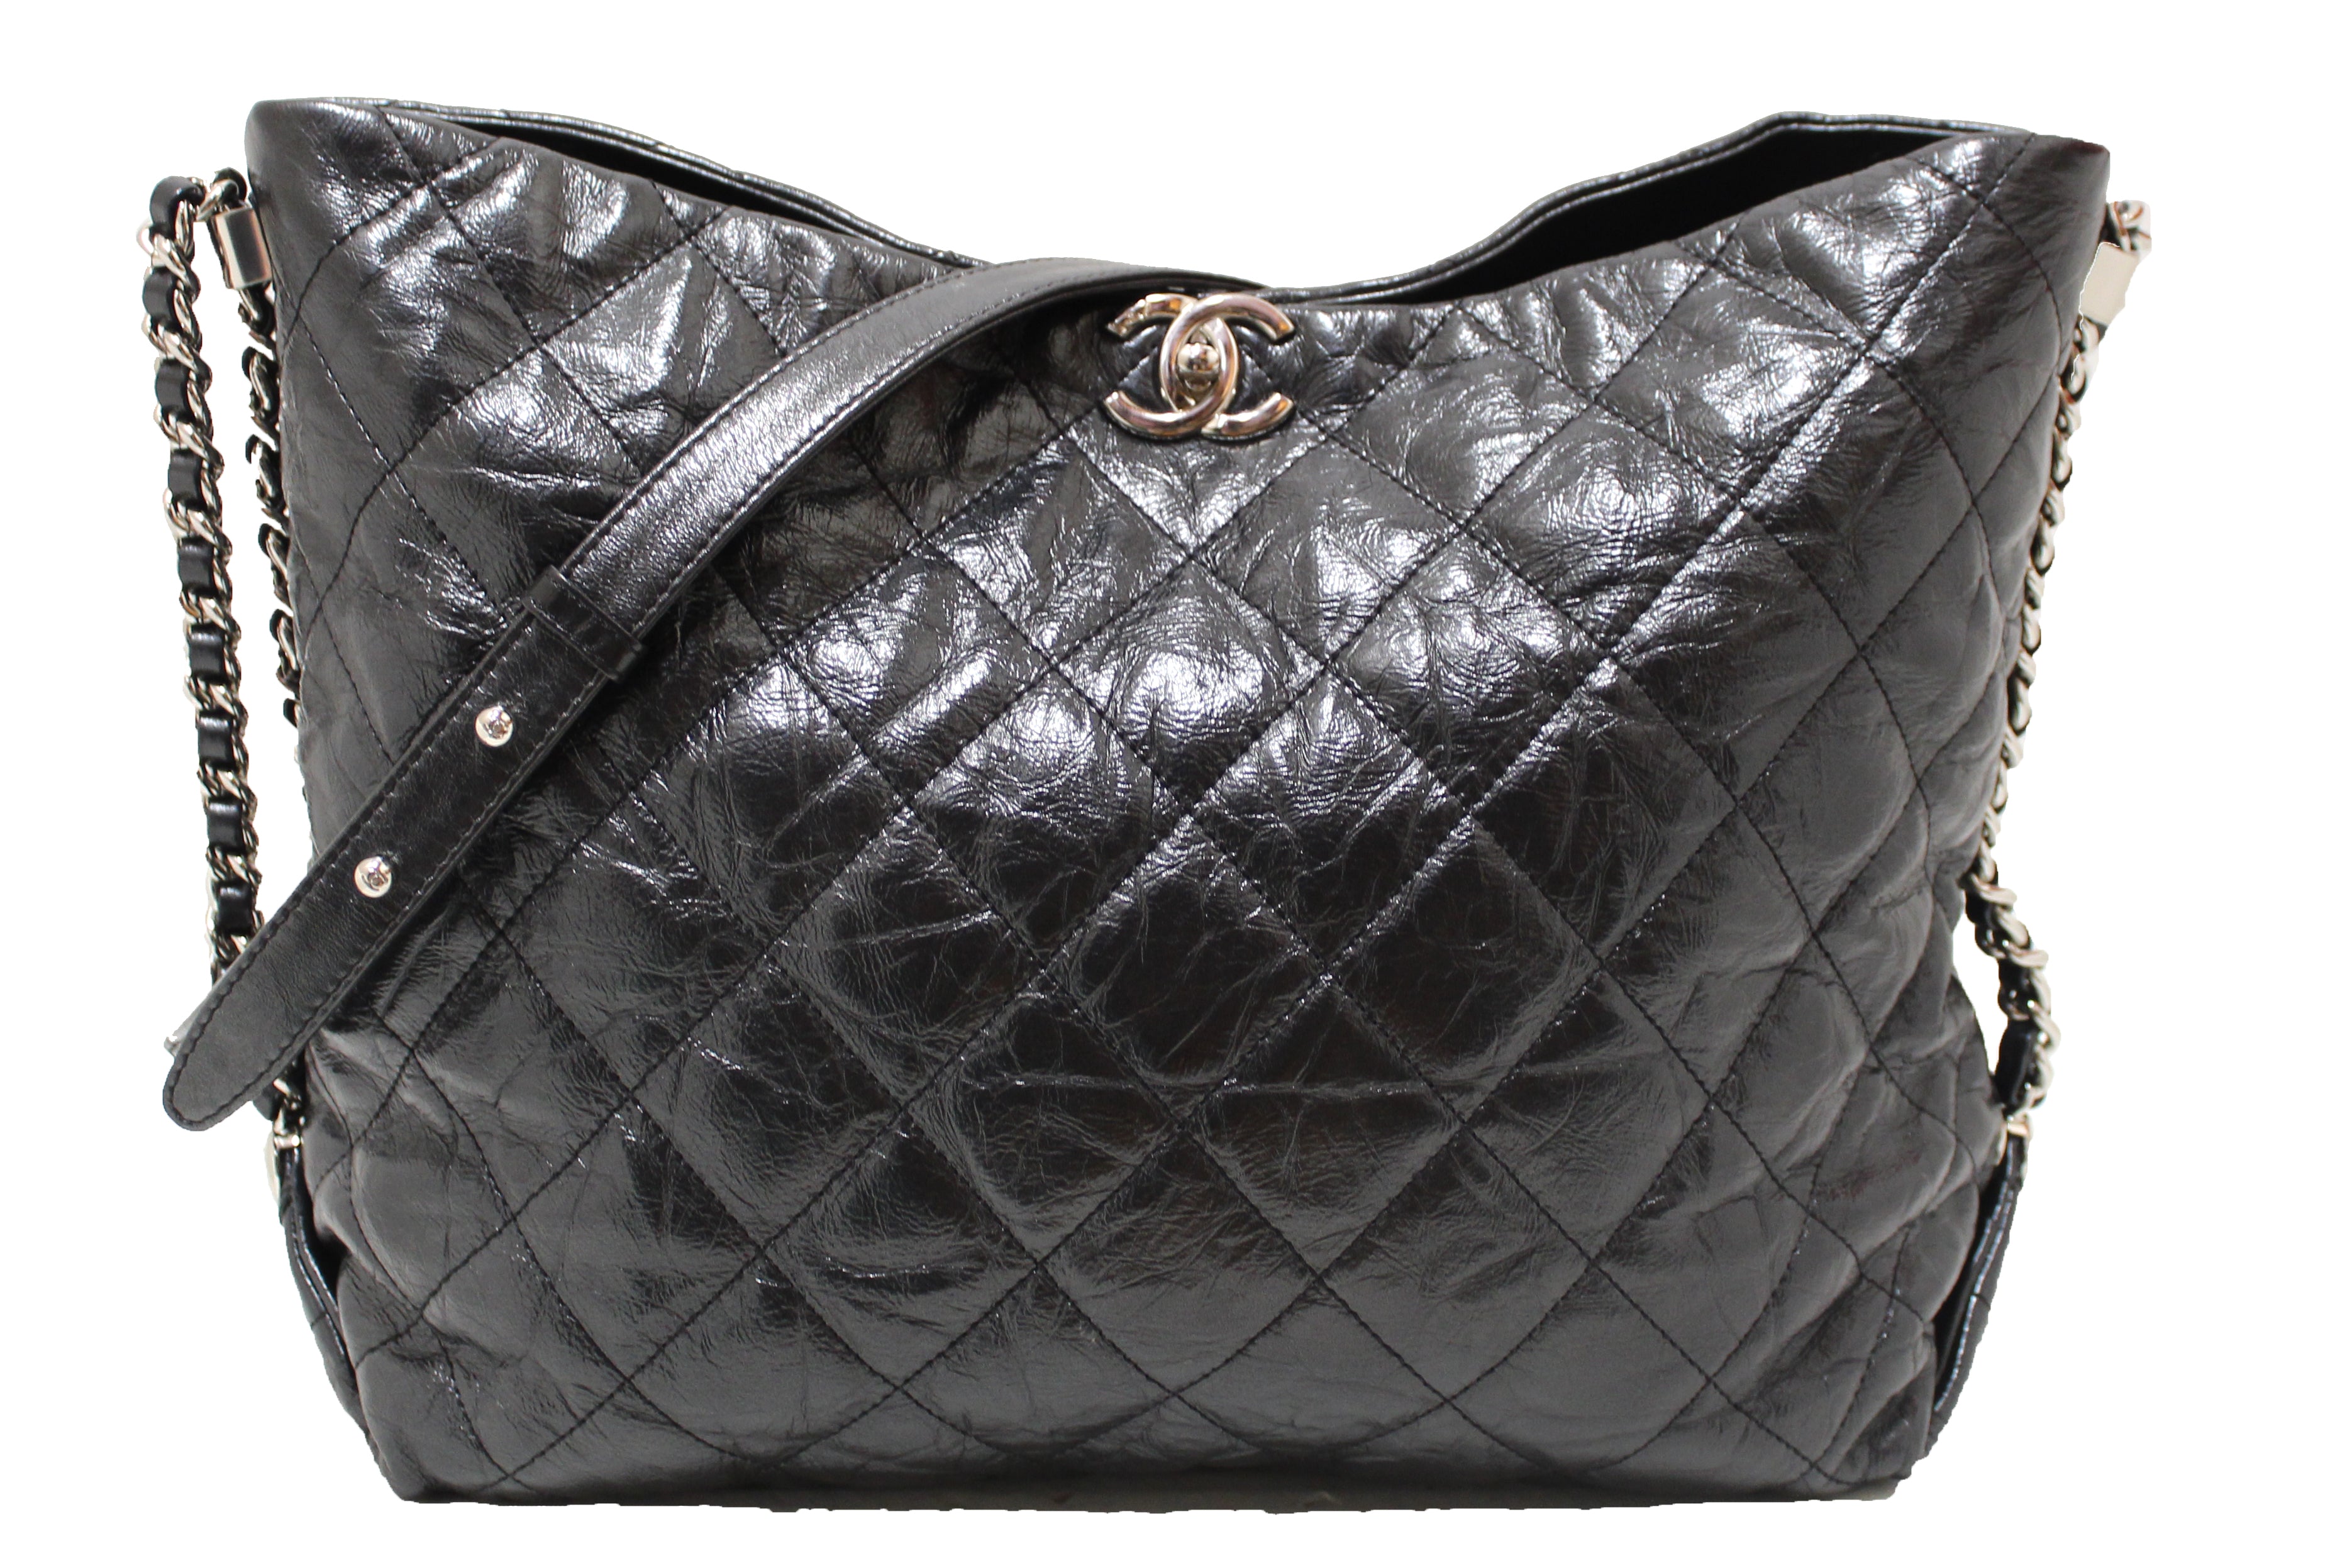 Authentic Chanel Grey Metallic Lambskin Quilted Leather Hobo Shoulder Bag